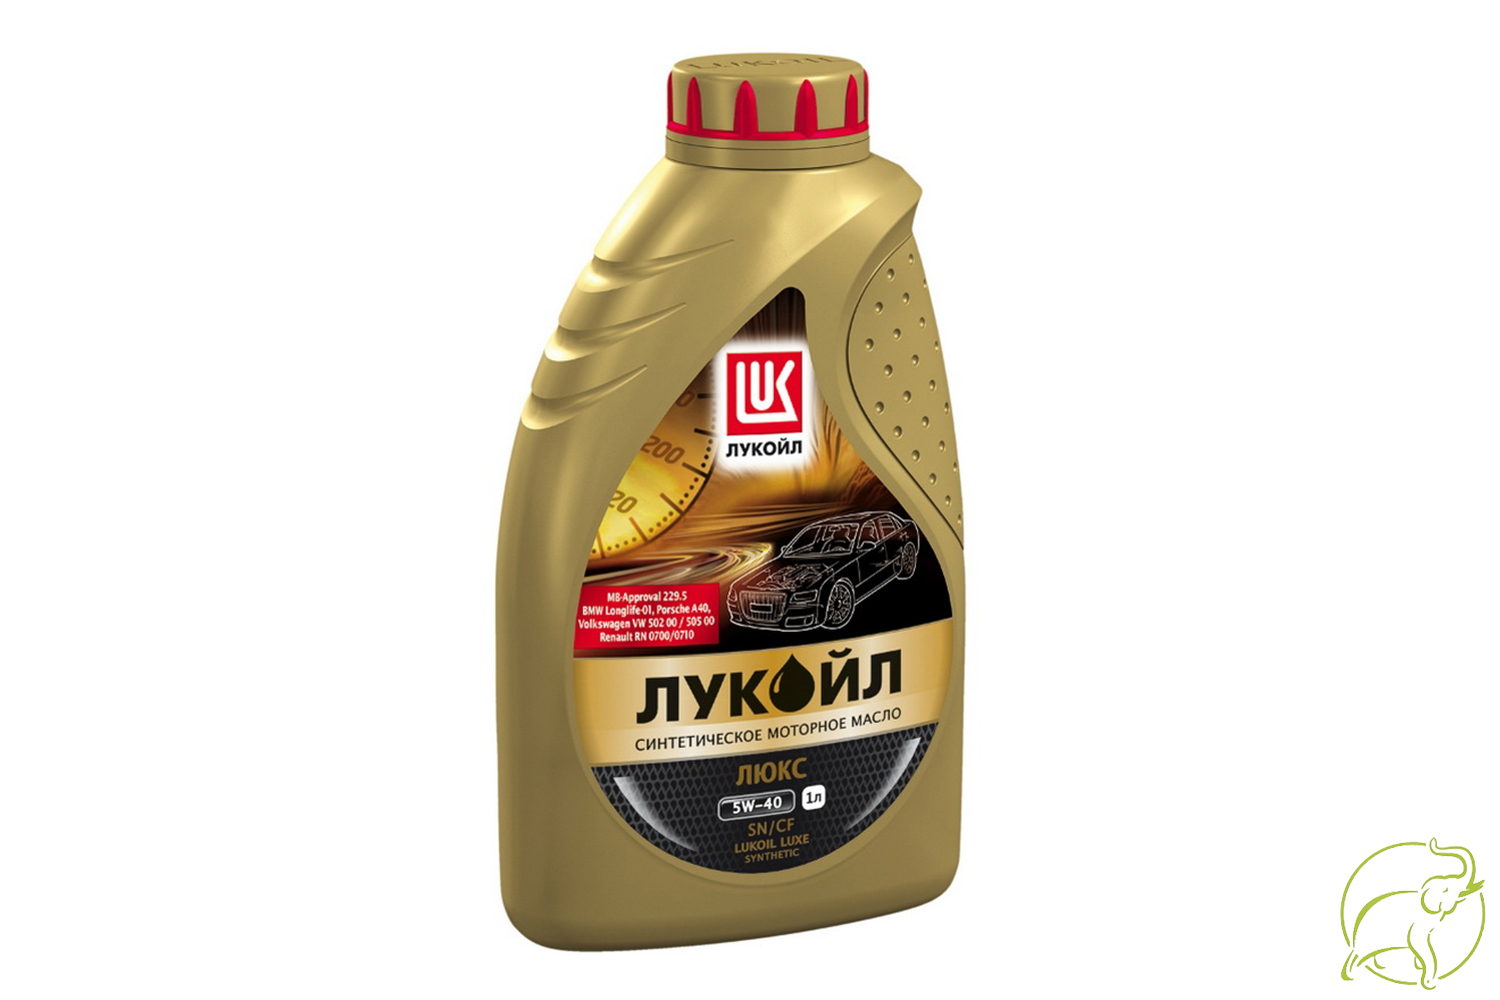 Моторное масло лукойл sn cf. Масло Лукойл Люкс 1л синт 5w40. Lukoil Luxe, Synthetic SAE 5w-40, API SN/CF. Масло моторное Лукойл Люкс синтетическое SAE 5w-40 API SN/CF. Масло Лукойл Люкс моторное синтетич.SAE 5w40 1л.